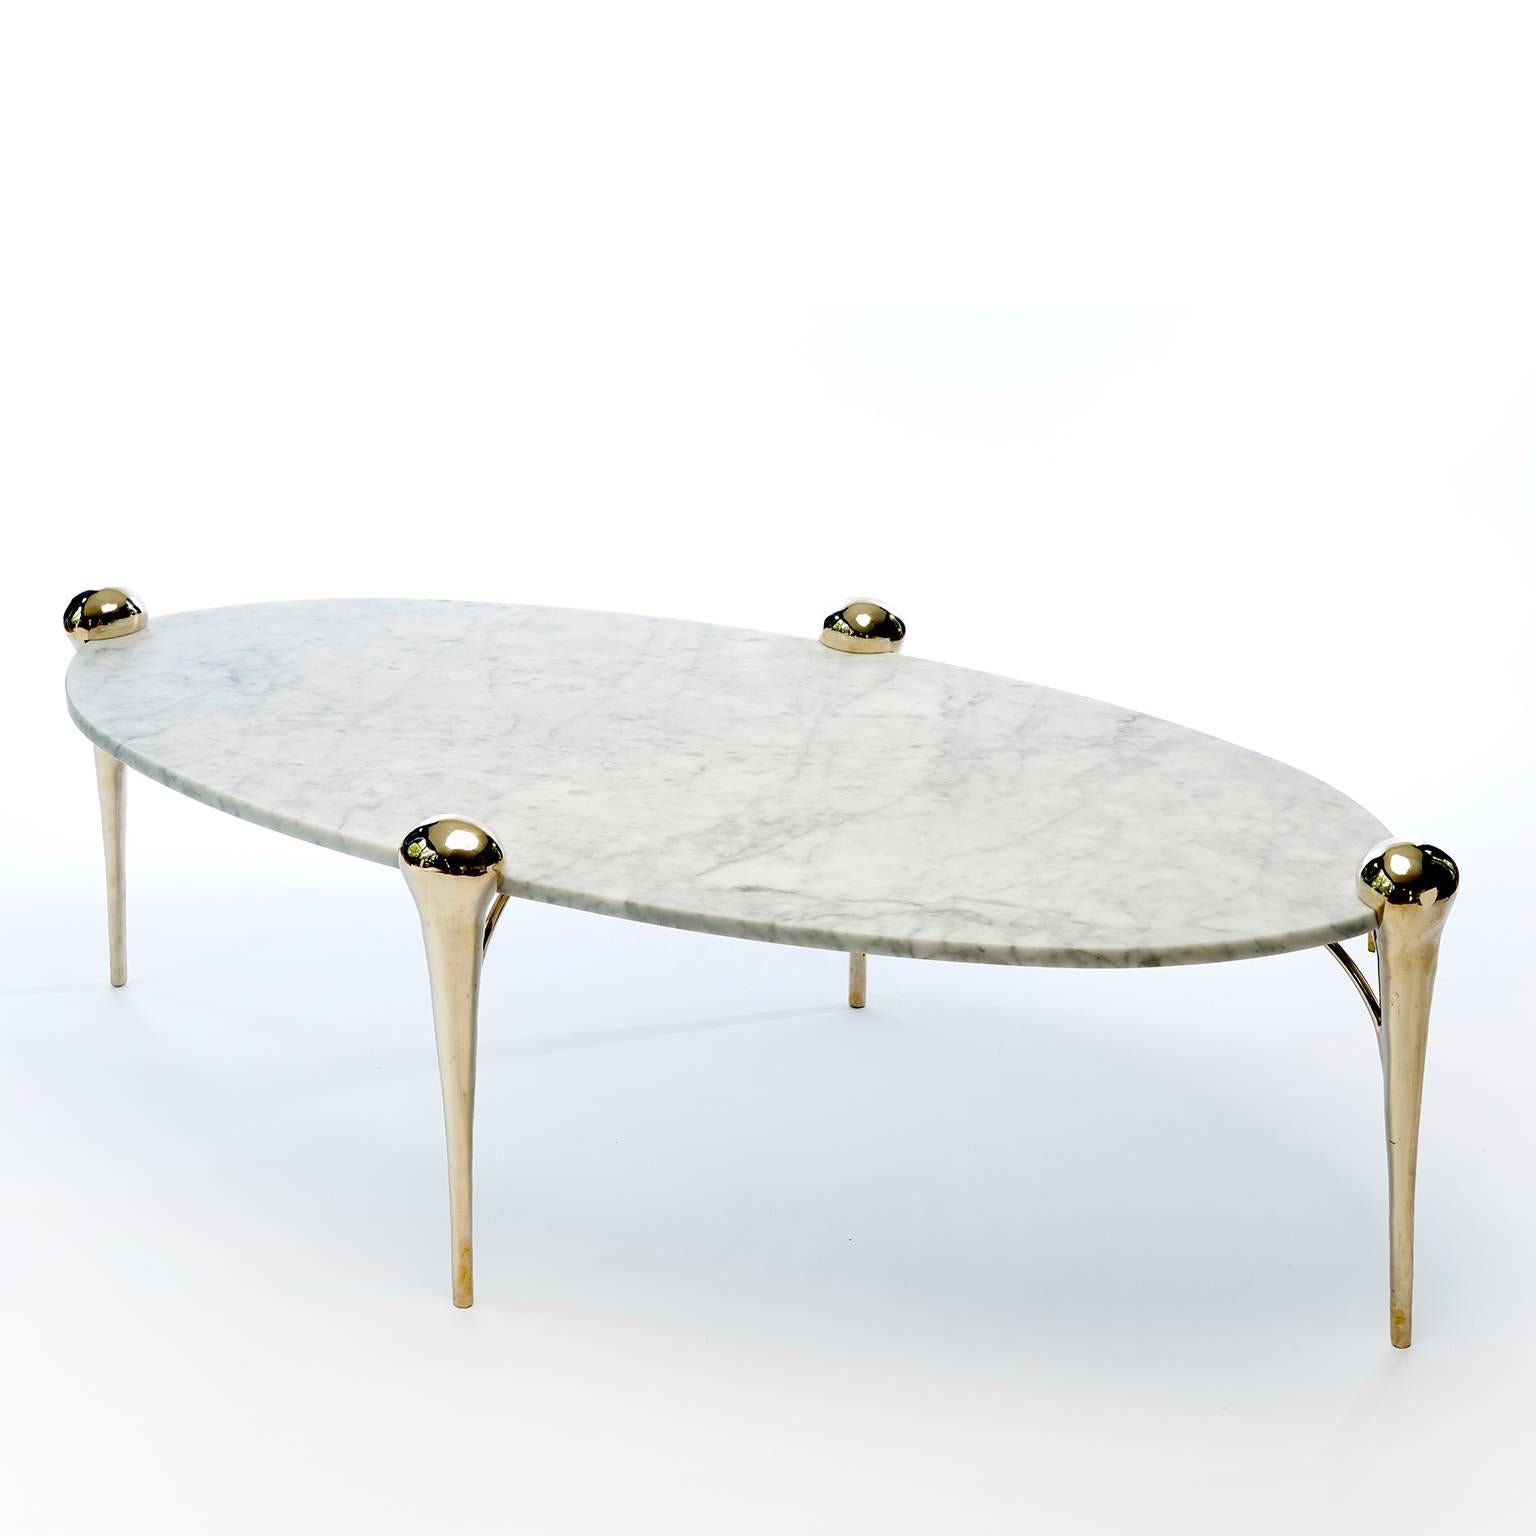 Holding the honed-marble tabletop, the sculpted cast bronze legs of the Petra coffee table resemble strong yet elegant legs of a camel. Designed by Helena Sultan, this piece embodies luxurious simplicity and harmony. Listed price excludes VAT.